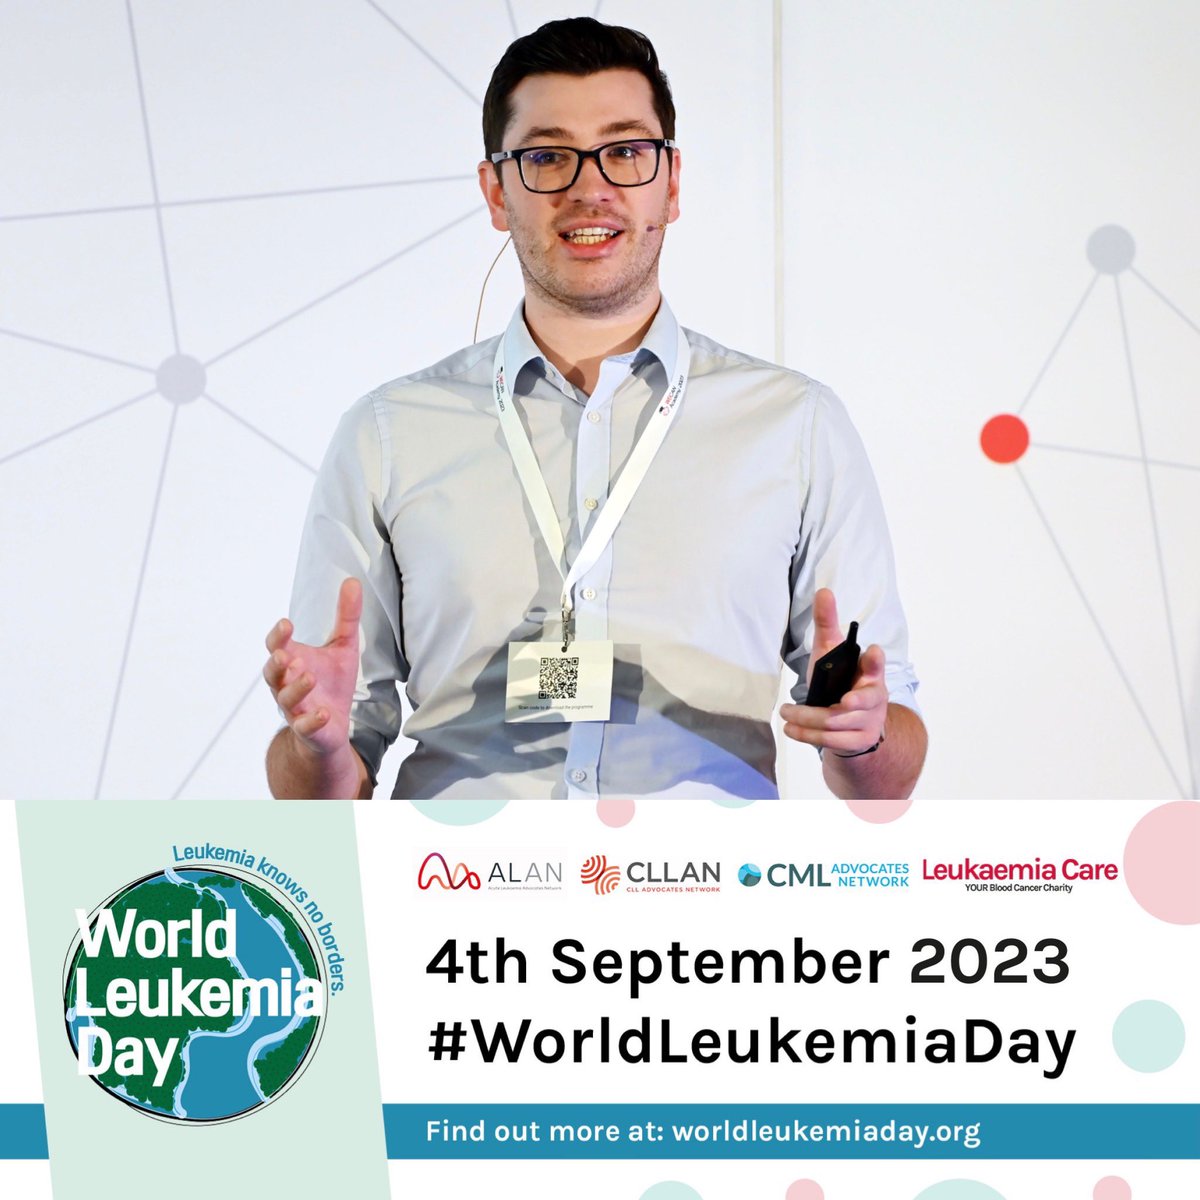 Today is #WorldLeukemiaDay when patient organisations from around the world come together to raise awareness of #leukaemia #leukemia and the importance of early diagnosis.

#BeLeukemiaAware and know how to spot the common signs and symptoms #SpotLeukaemia.